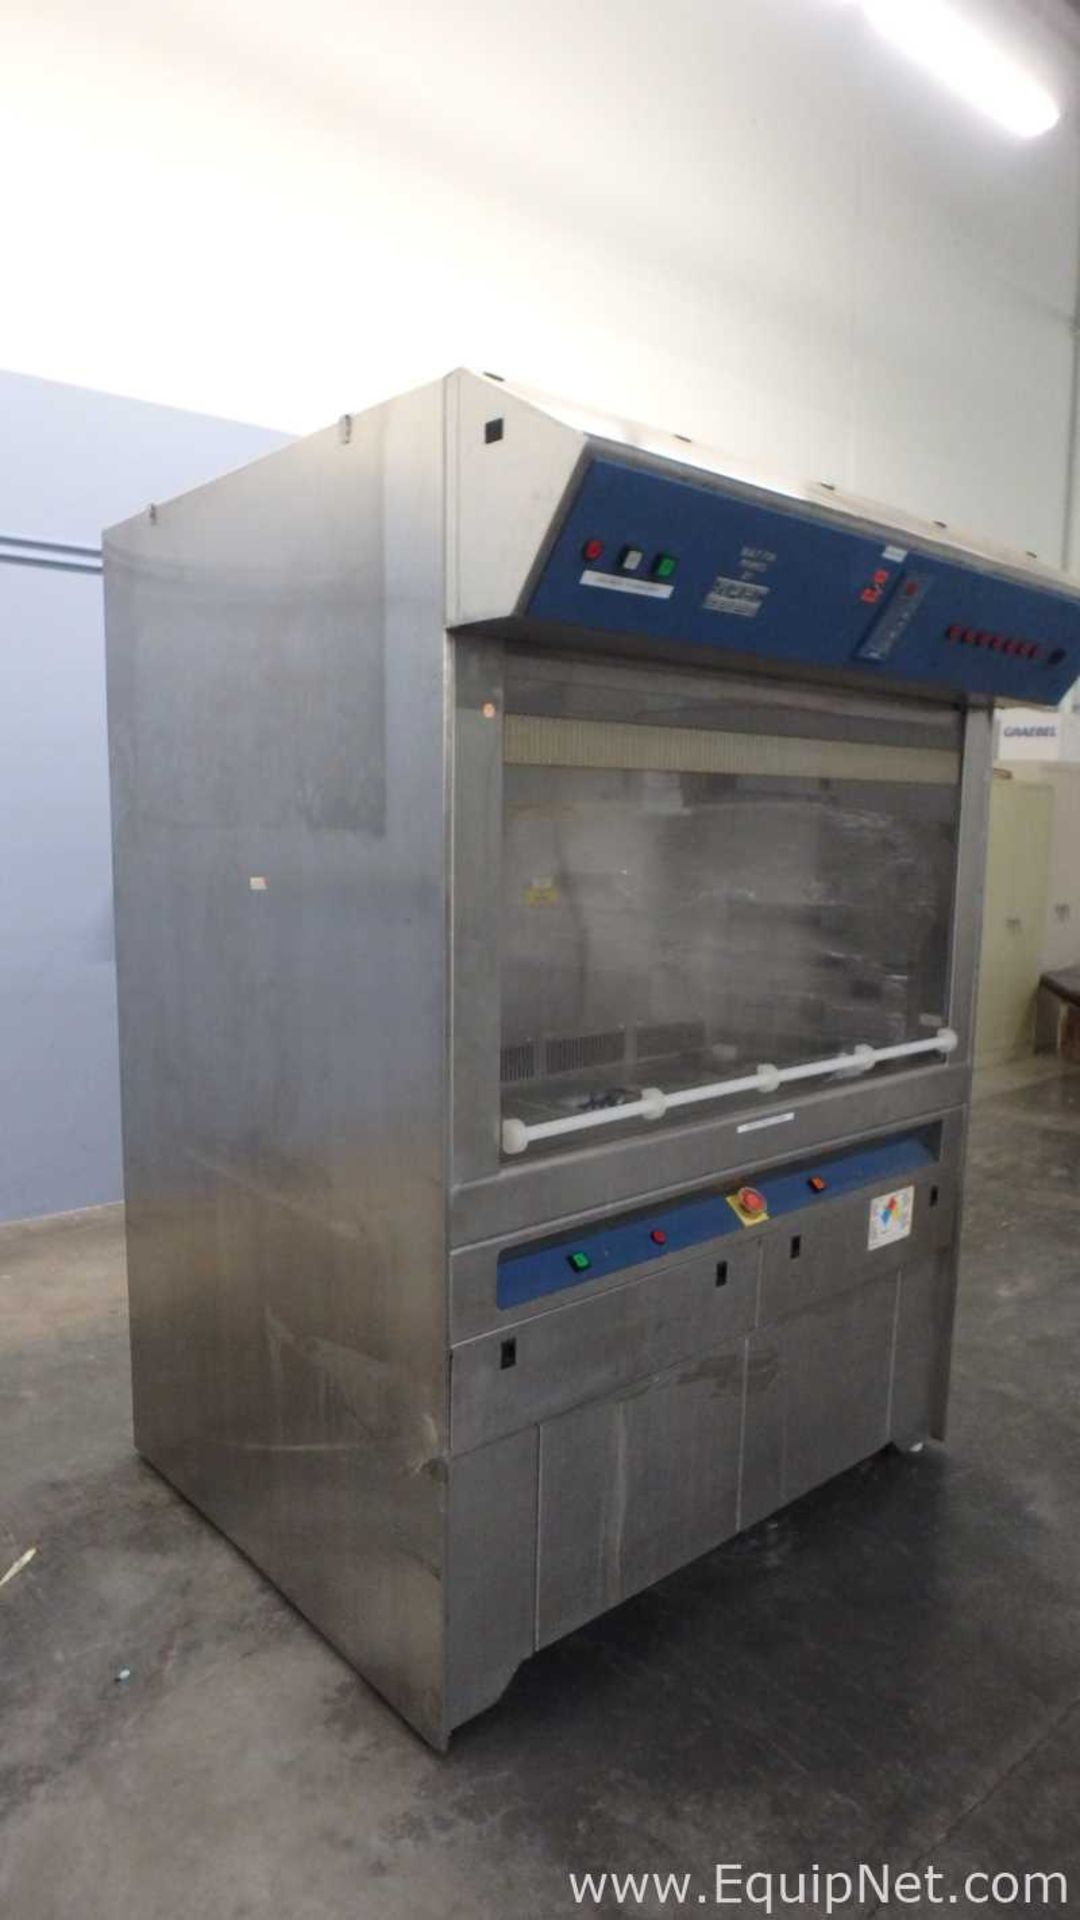 SPEC Semiconductor Process Equipment SBX5-36 Photoresist Developer System - Image 11 of 31